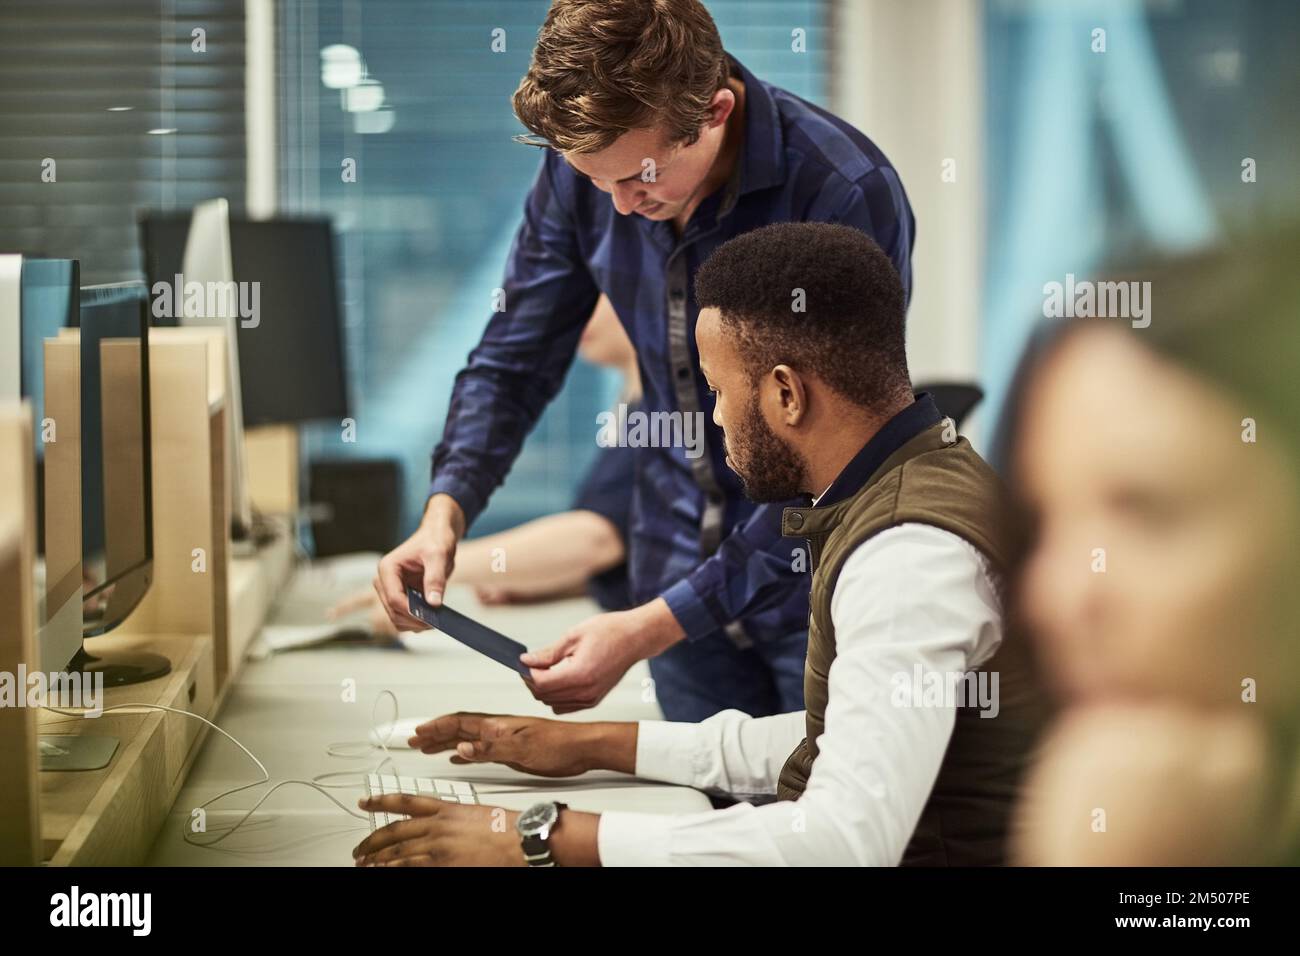 Aiming to achieve the exceptional together. a group of designers working on computers in an office. Stock Photo